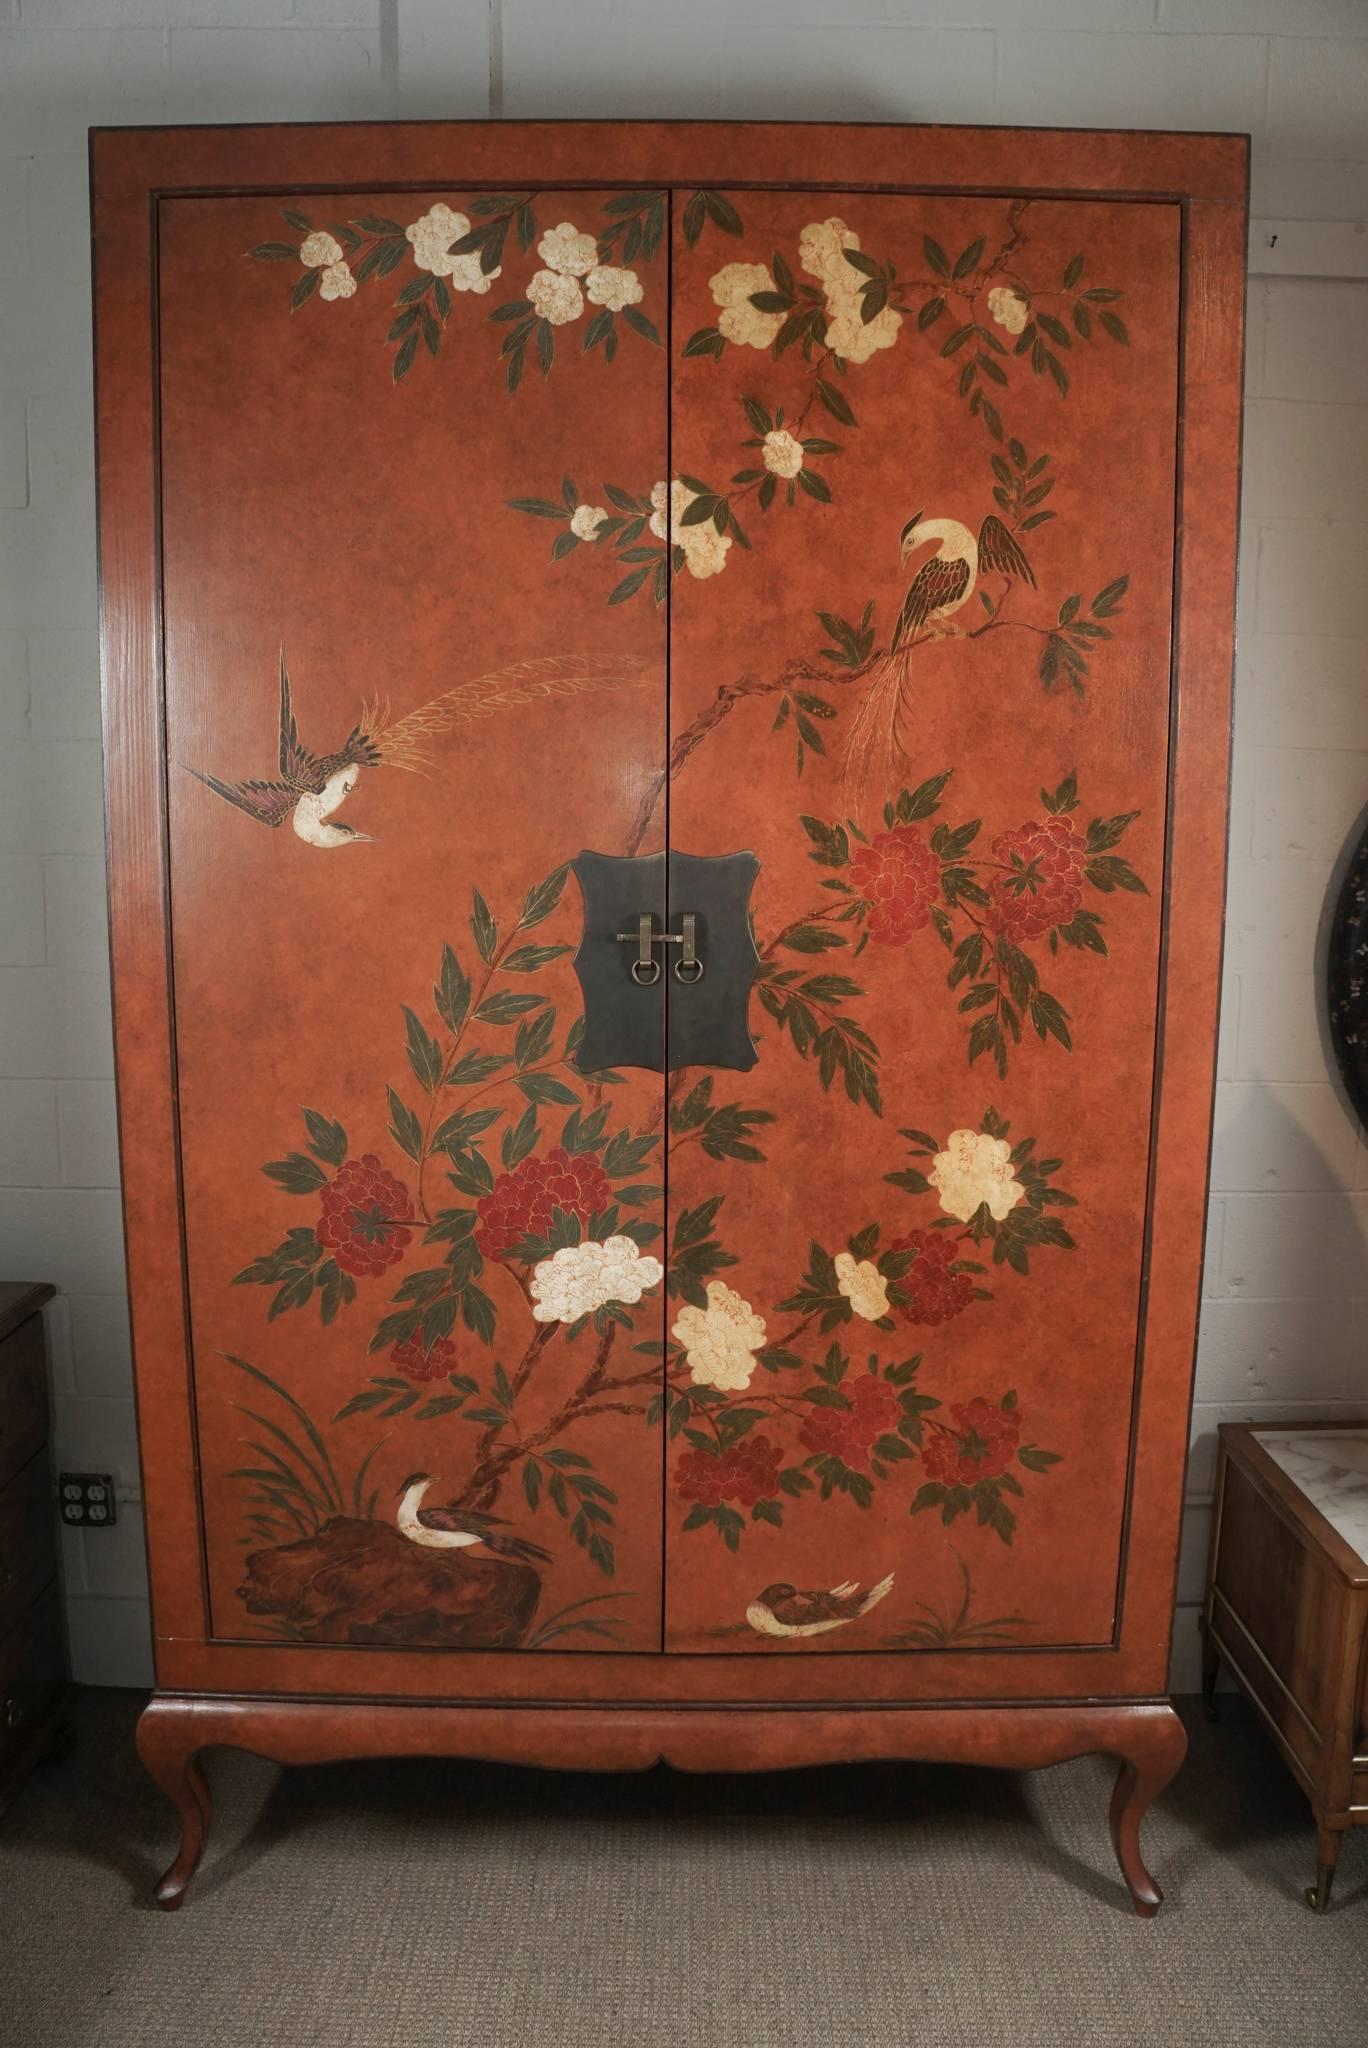 Here is a beautiful and monumental chinoiserie television cabinet with intricately hand-painted scenes of
birds and branches with flowers. The cabinet has full surround scenes on the exterior and is matched on the sides with an urn motif. The